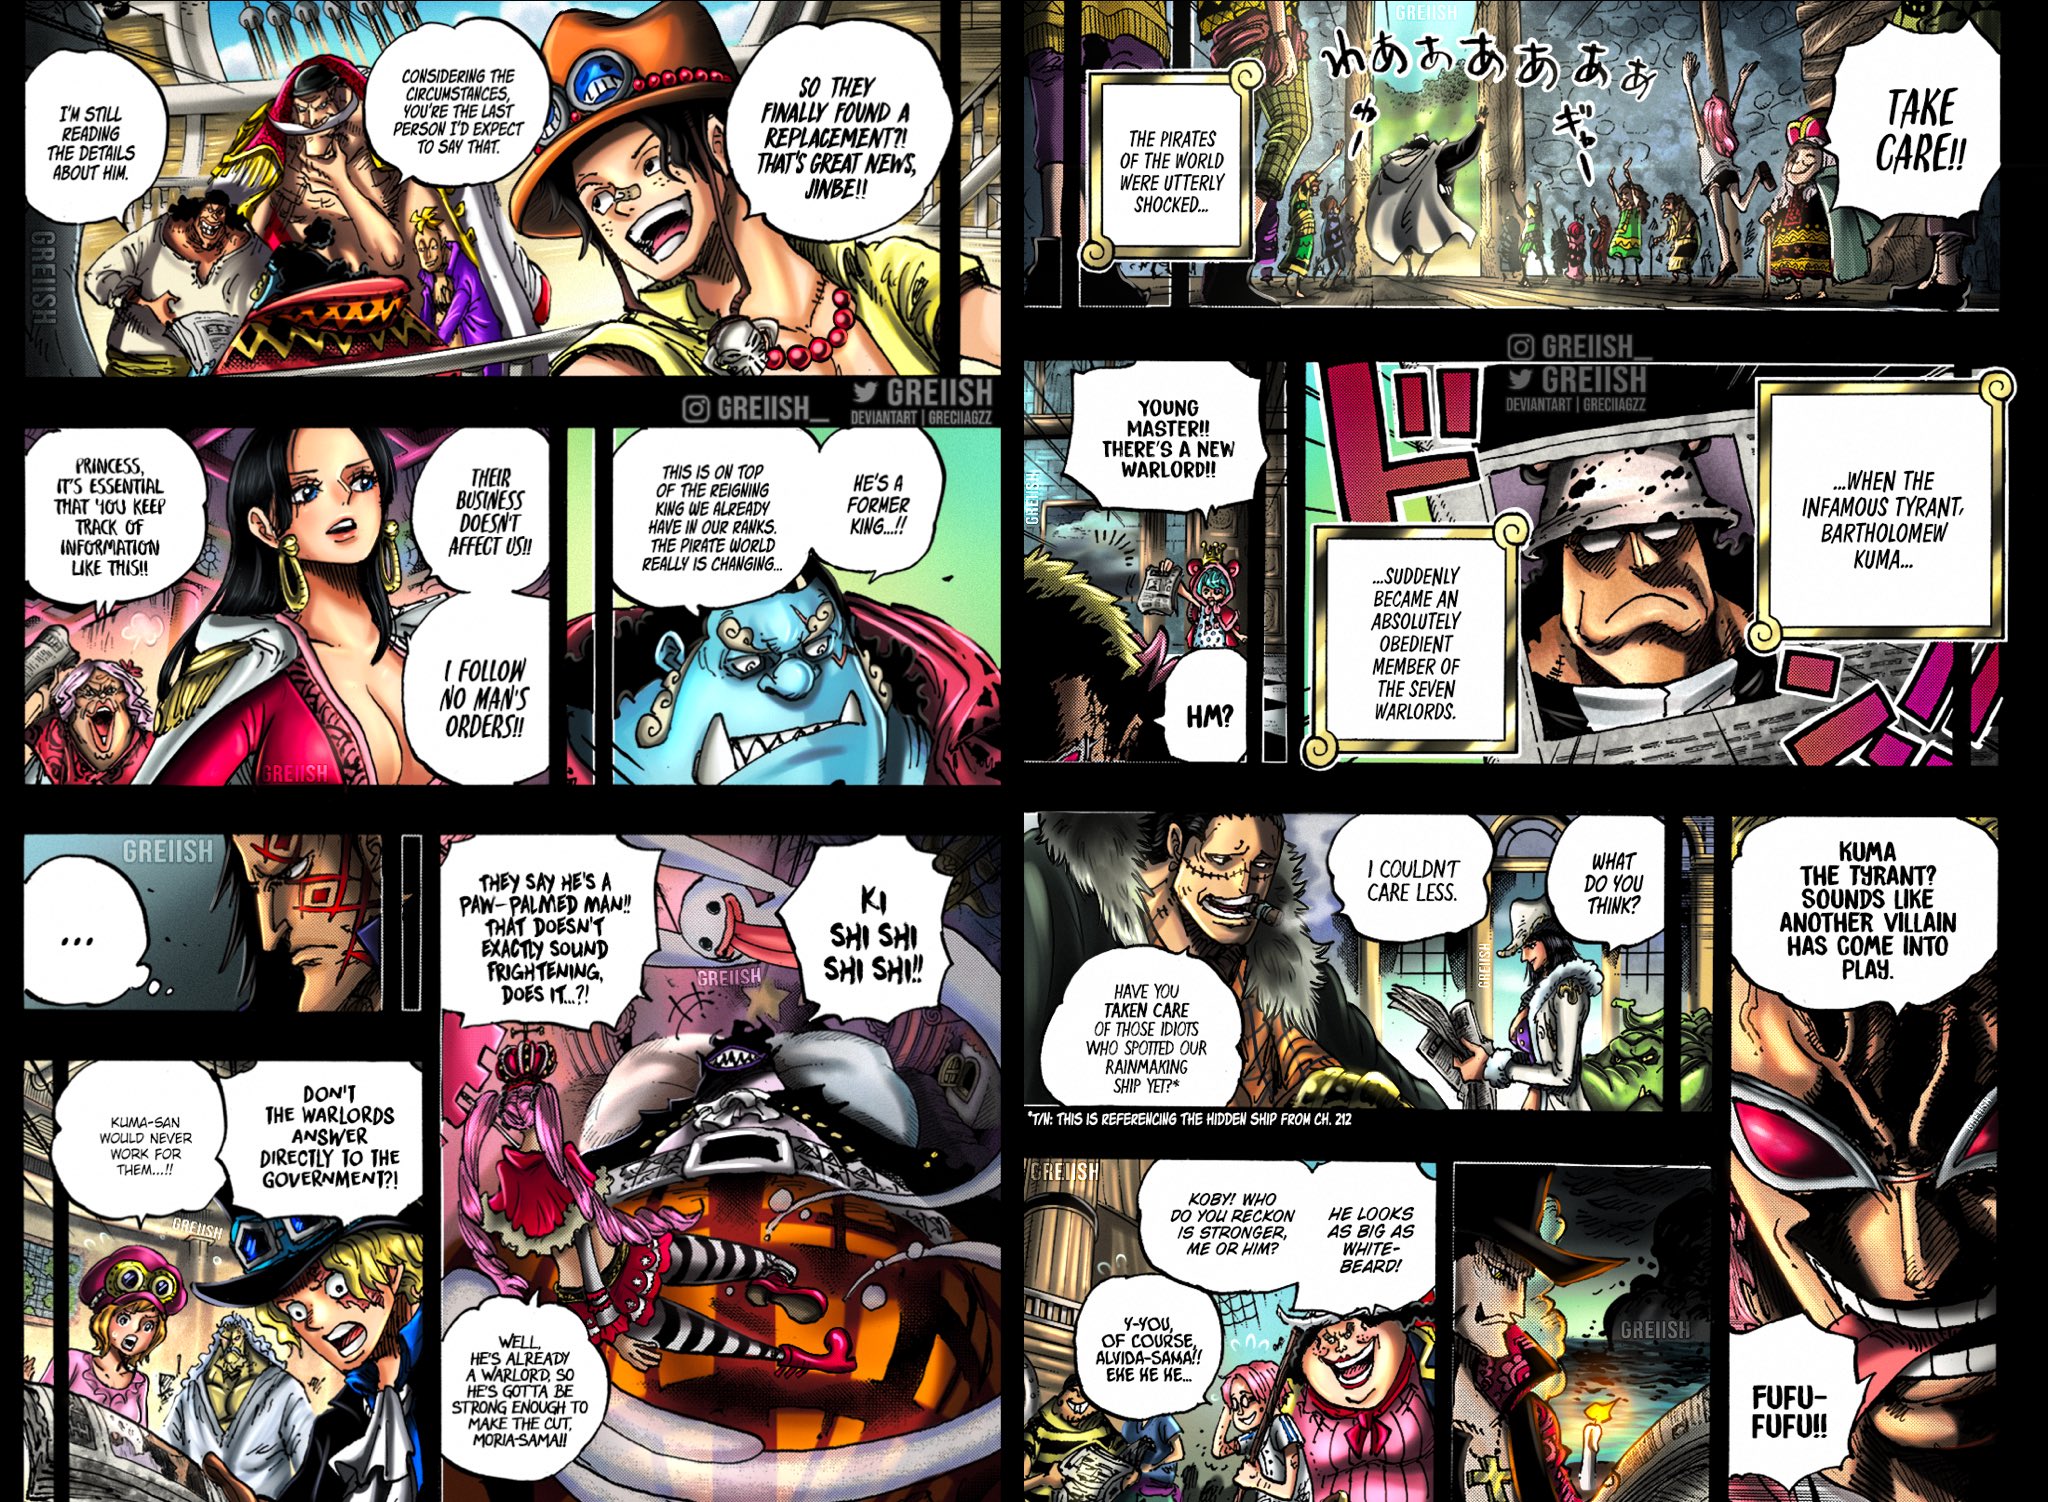 One Piece, Chapter 1095  TcbScans Net - TCBscans - Free Manga